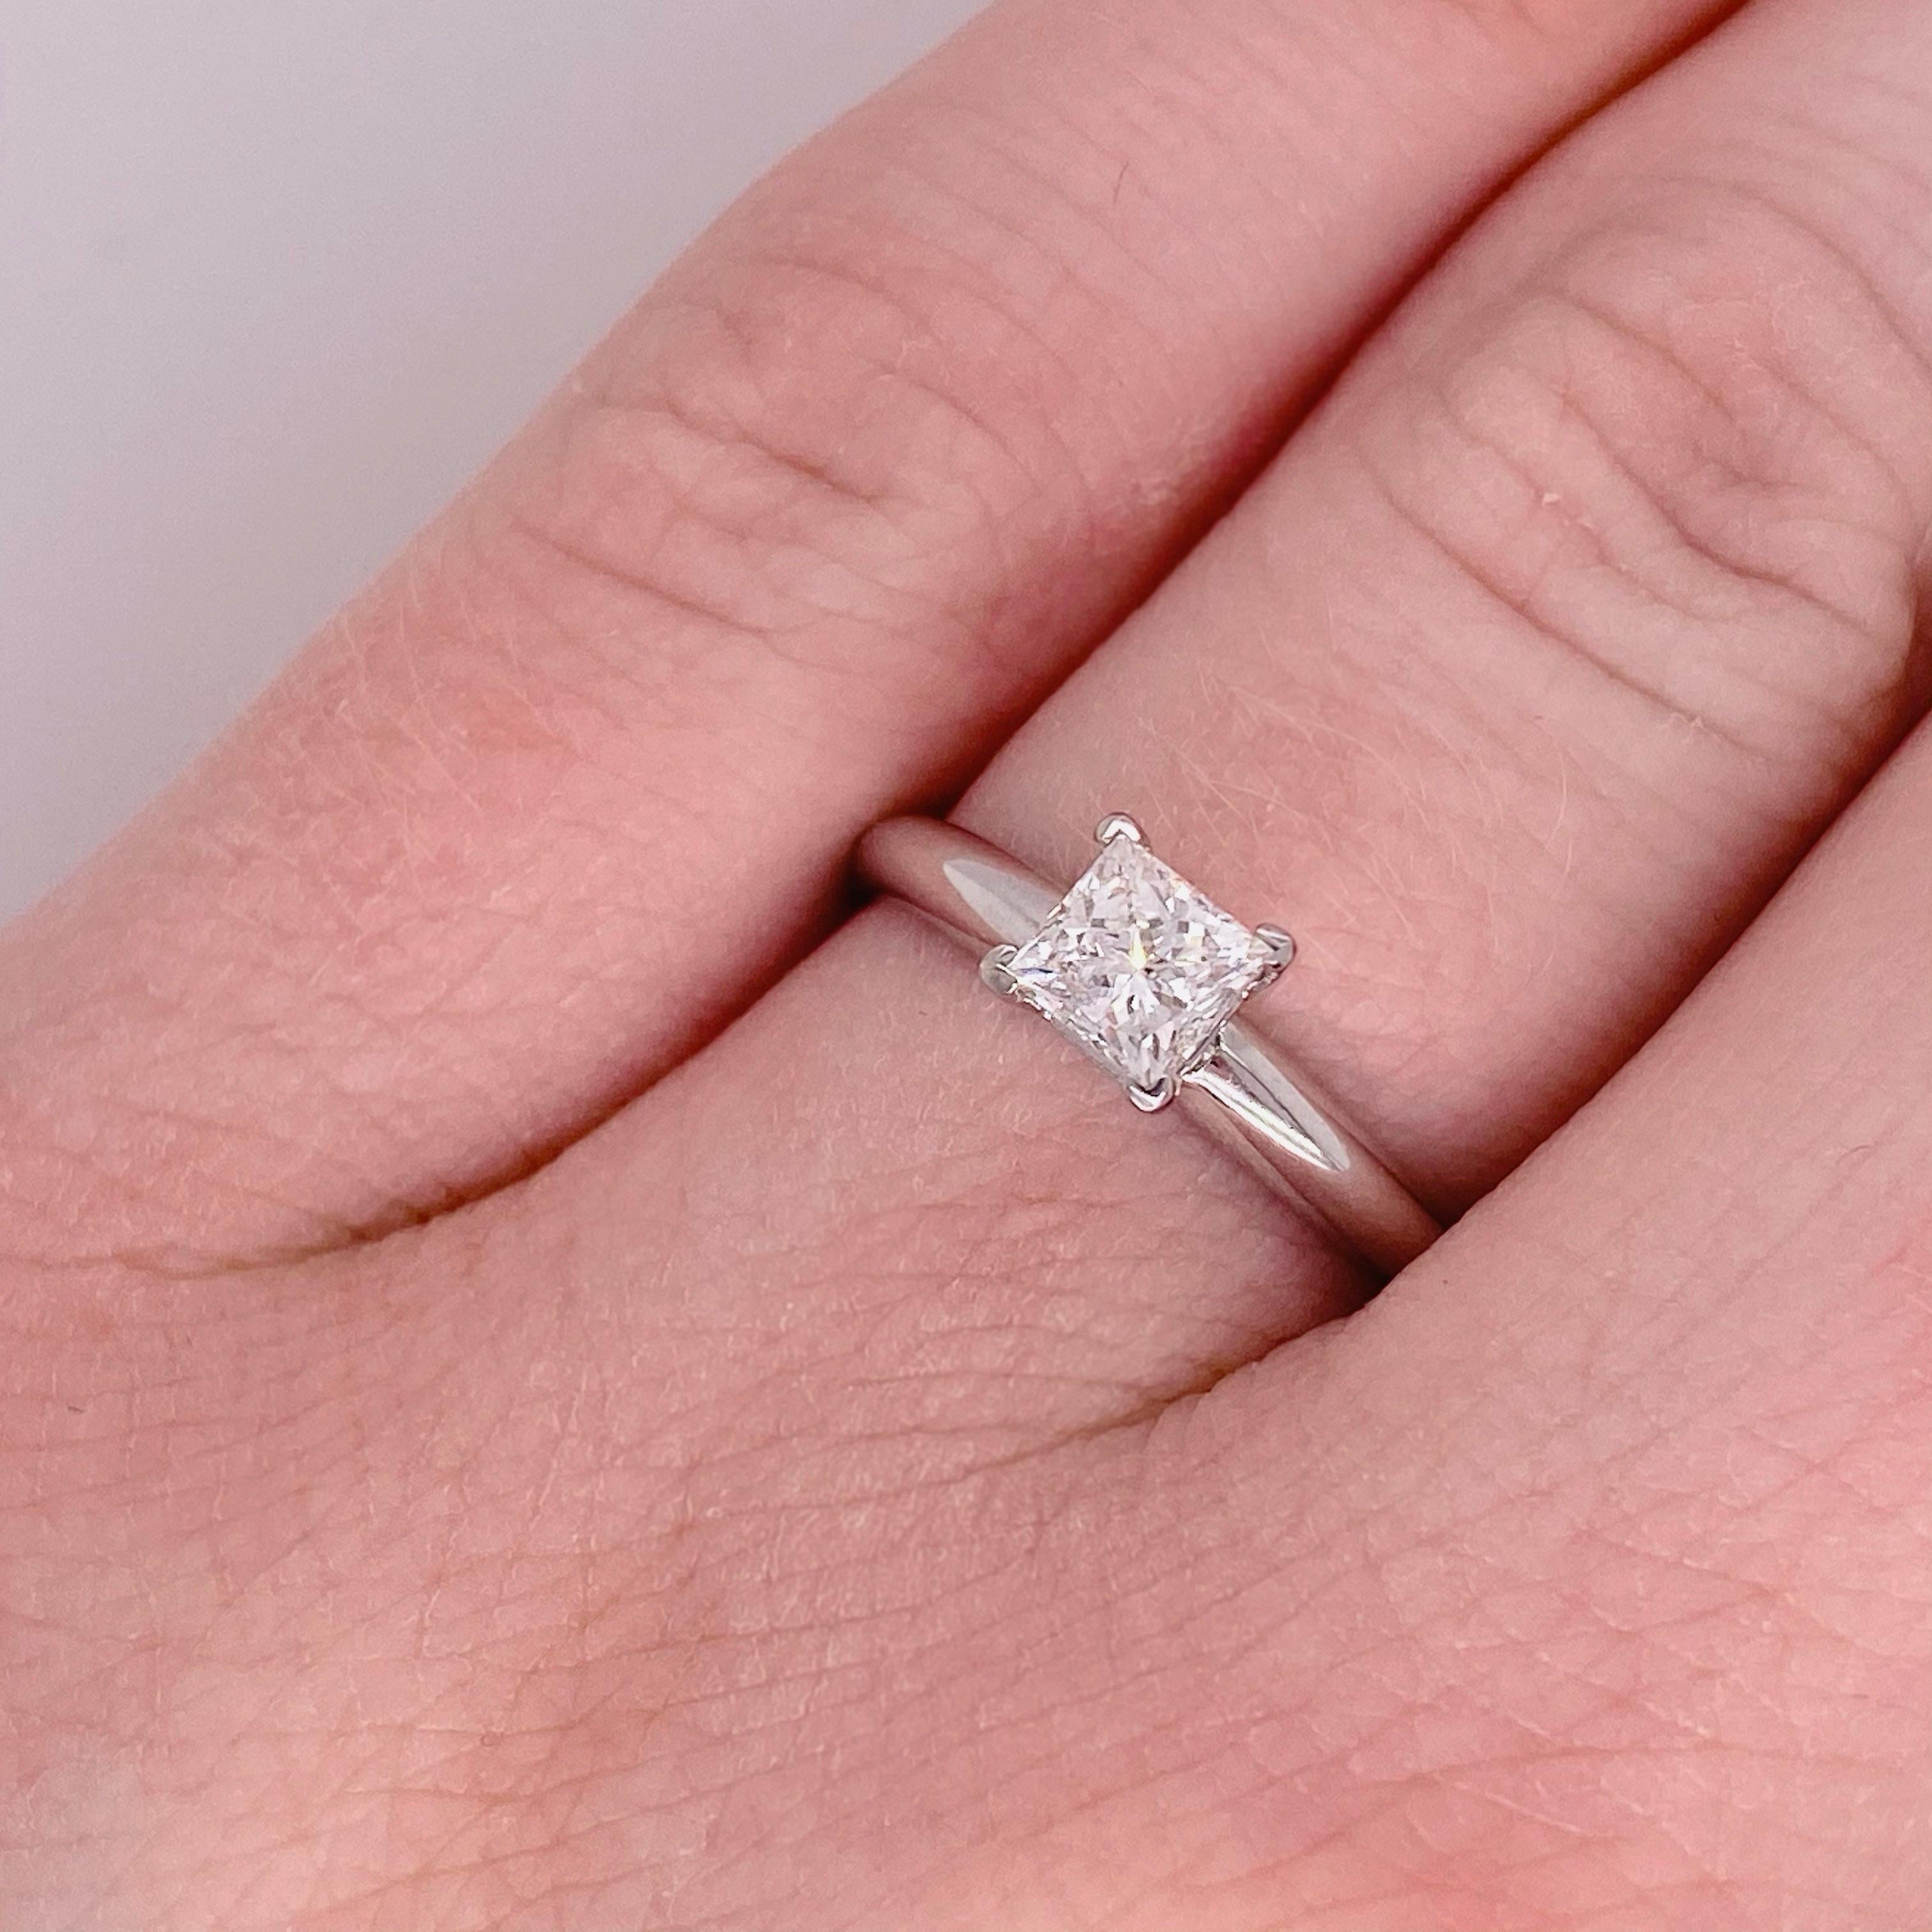 Solitaire Diamond Engagement Ring with Princess cut Diamond Center
The solitaire engagement ring is a classic design the focusses on the center diamond. This center diamond is a .62 carat princess cut diamond (or faceted square cut) that's of